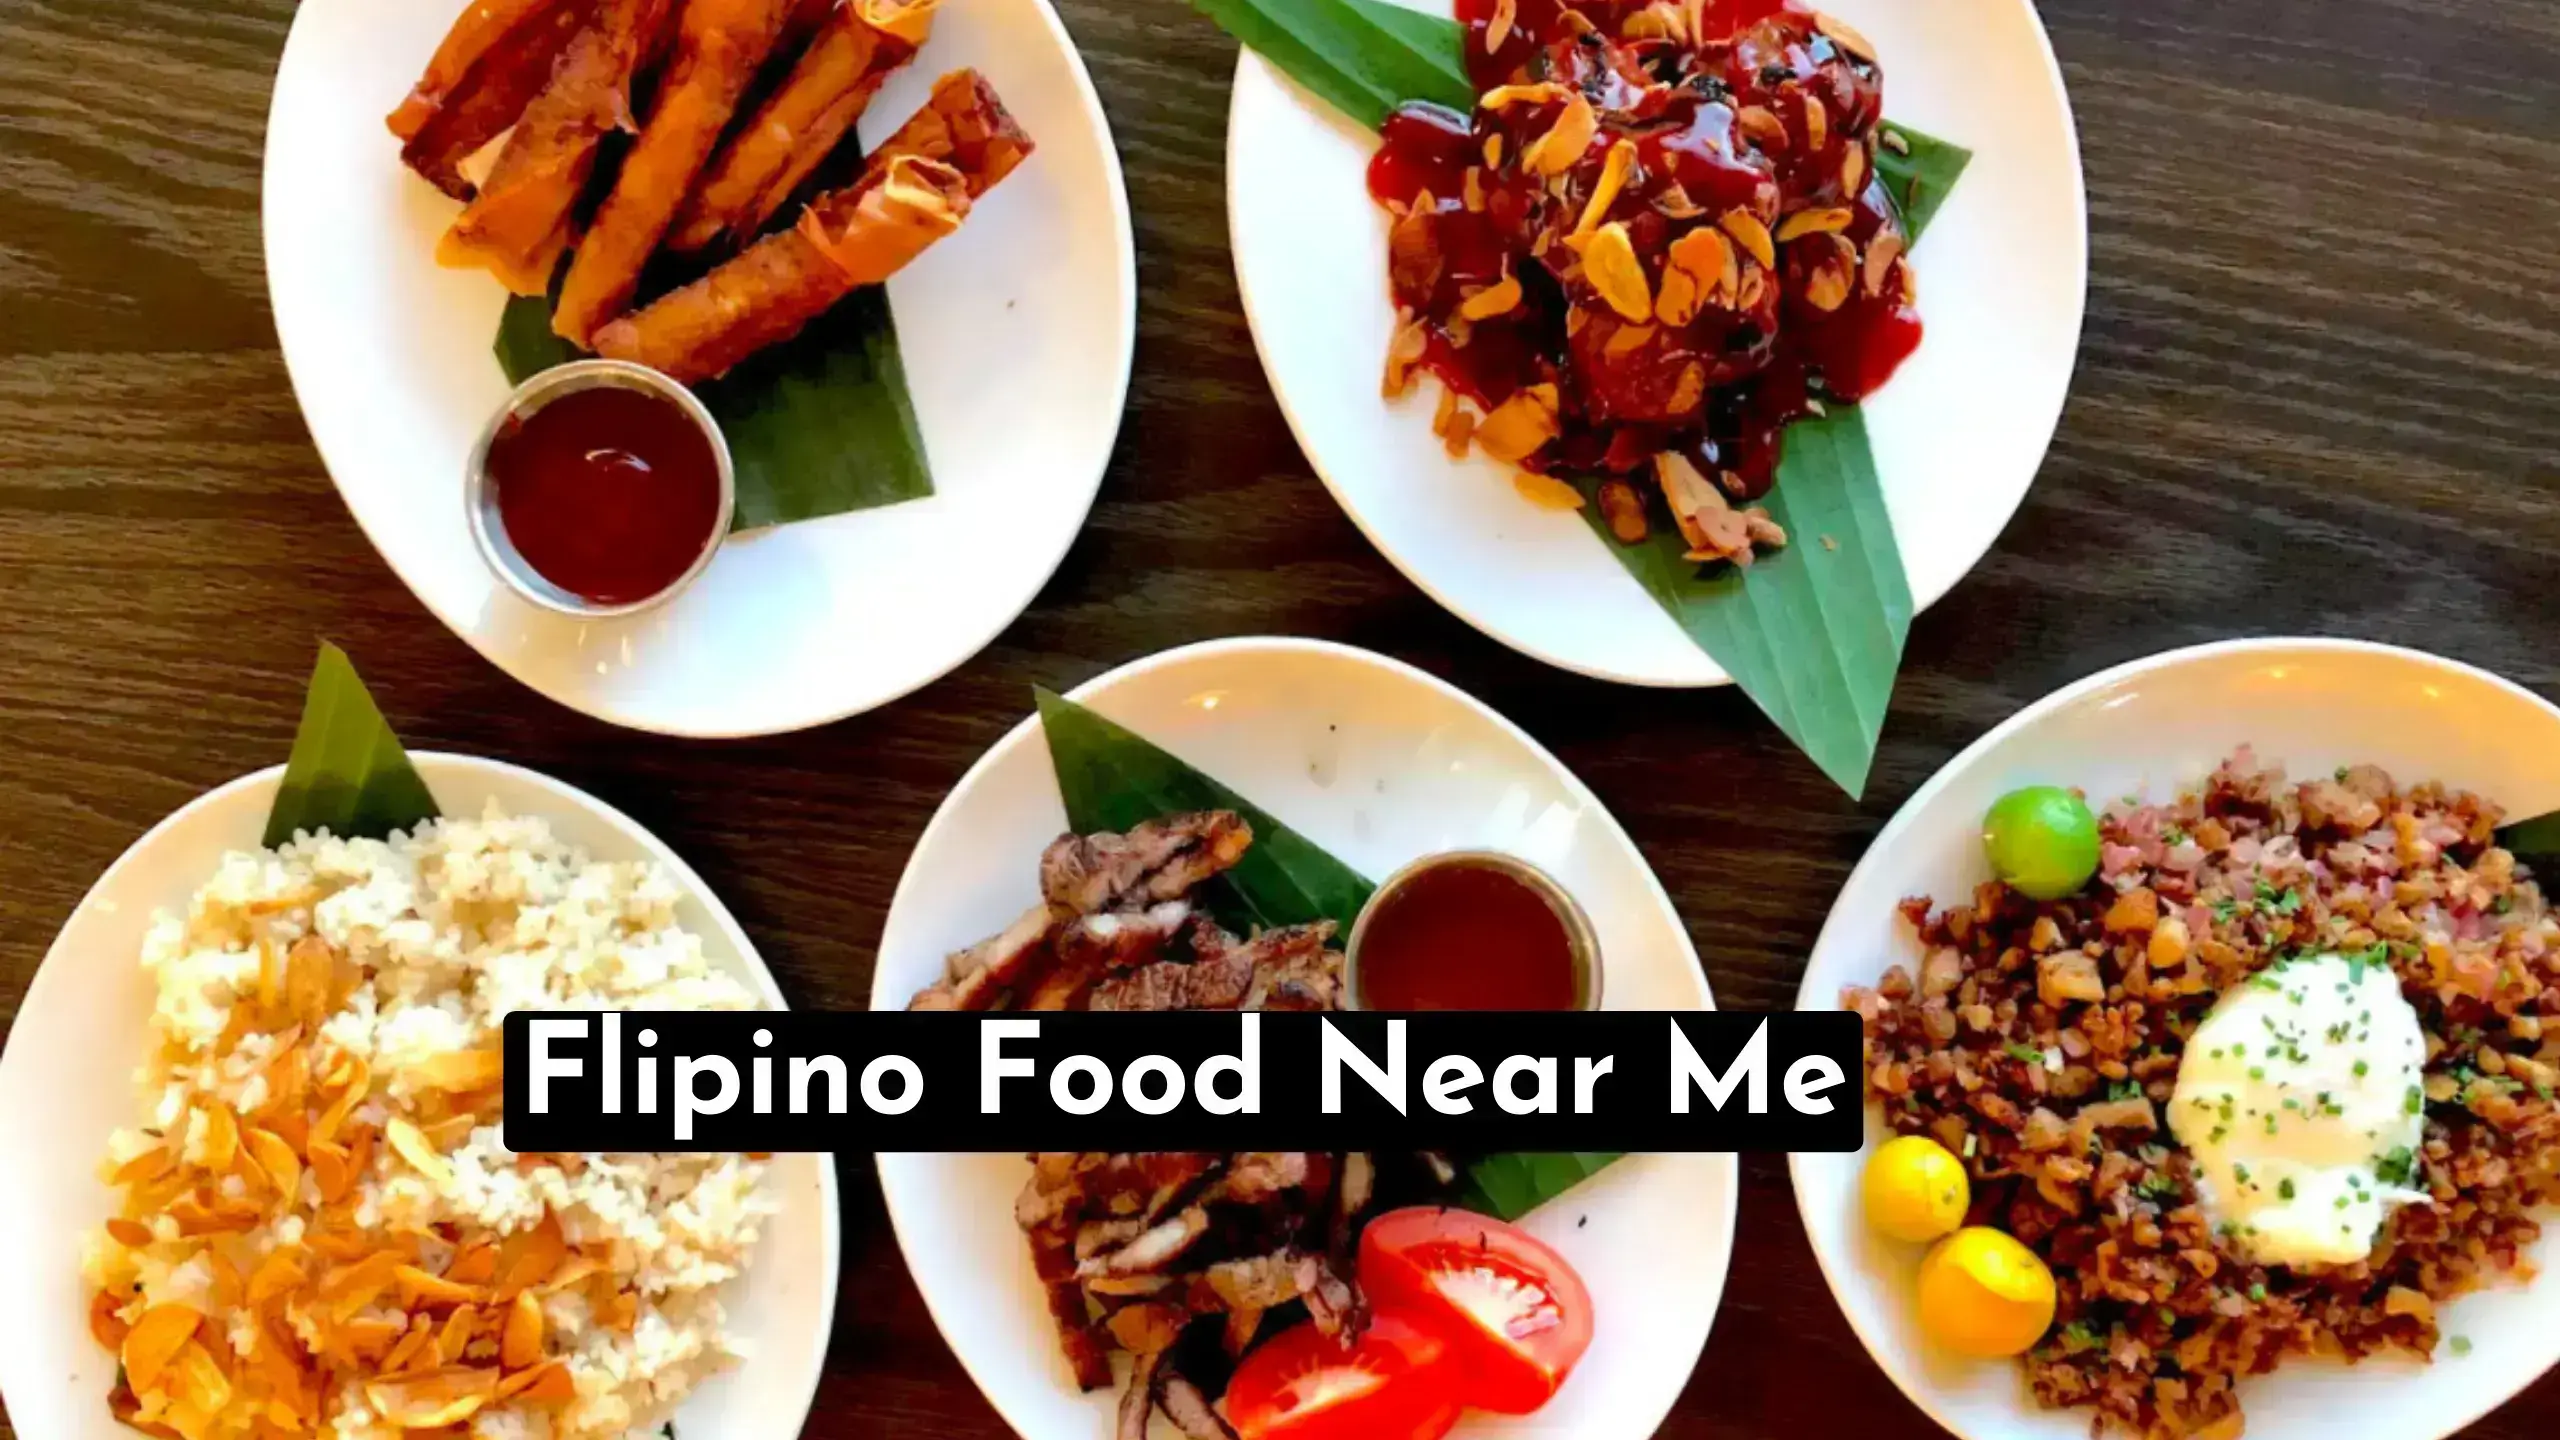 A Quick Guide To Locate Closest Filipino Food Near Me | Also Find The Most Reputed Restaurants With Top Recommendation For Filipino Food Menu